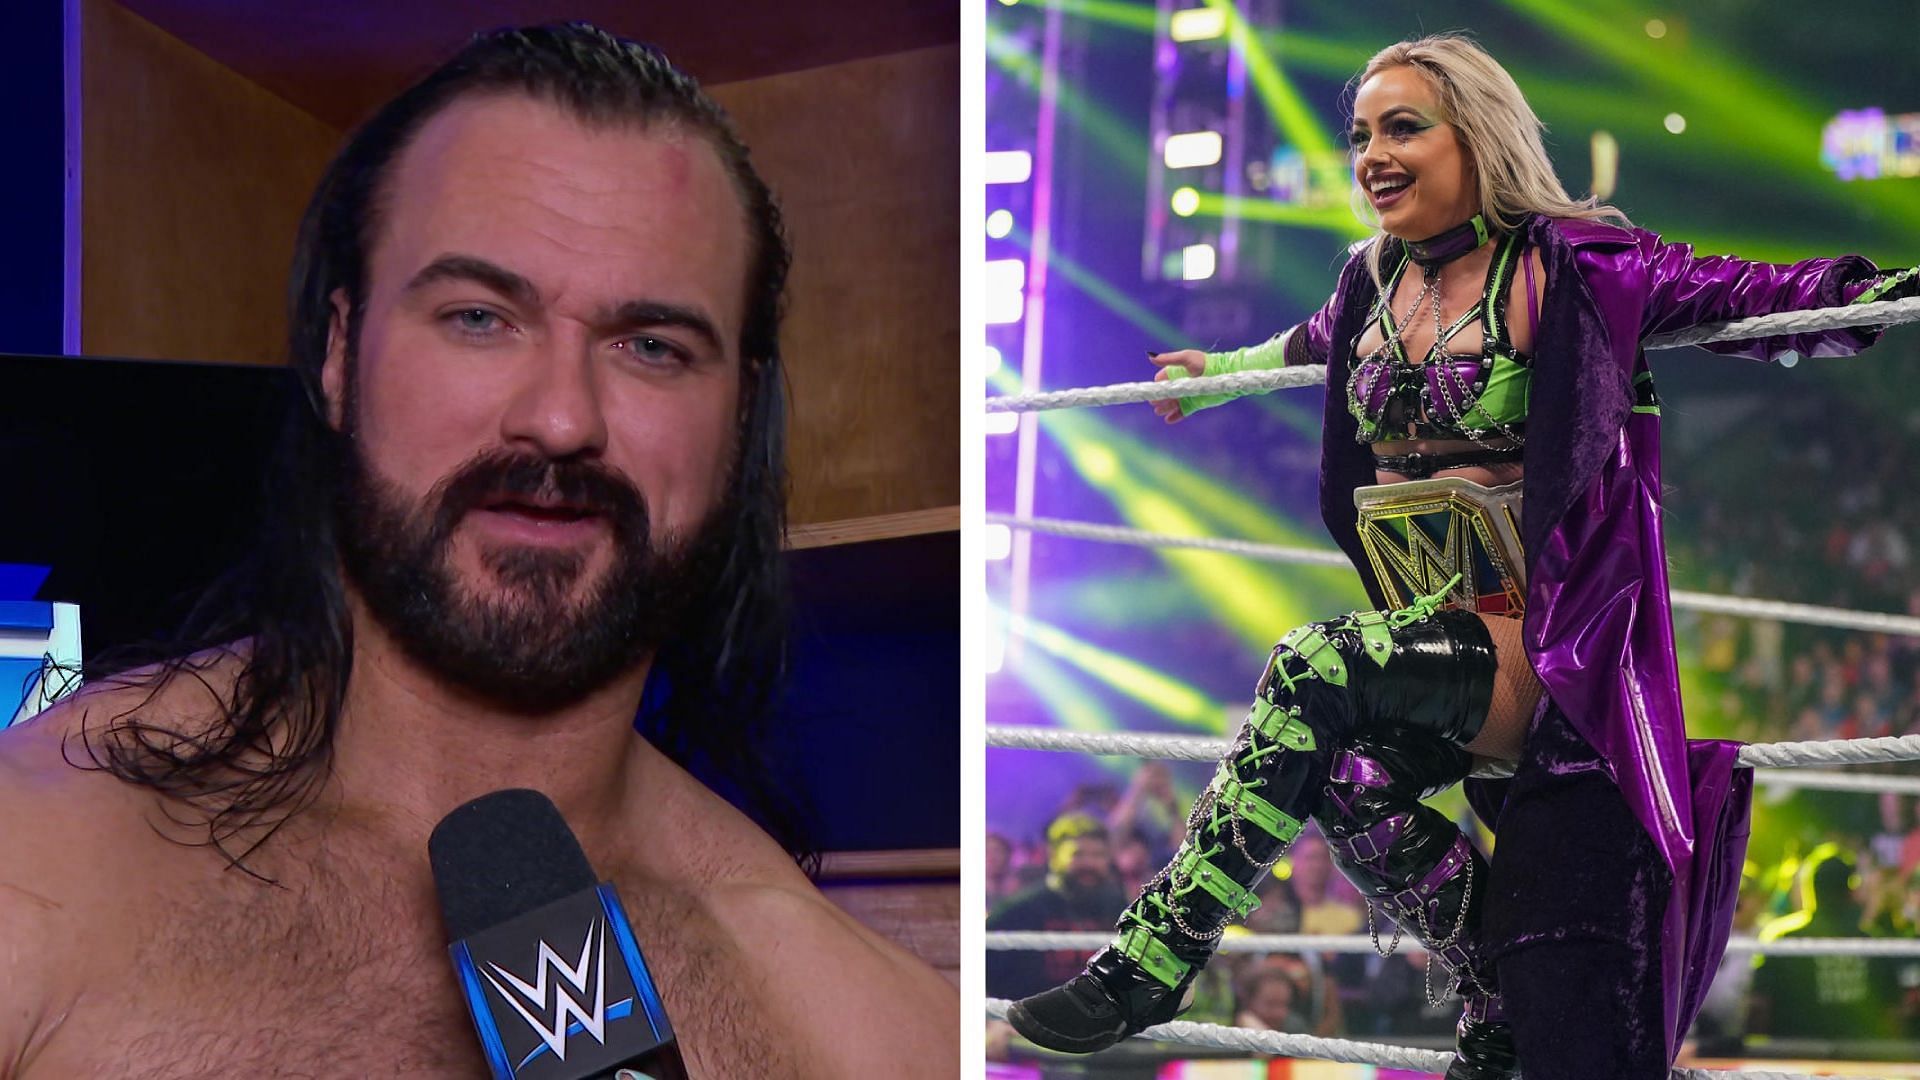 Liv Morgan could potentially team up with Drew McIntyre in WWE